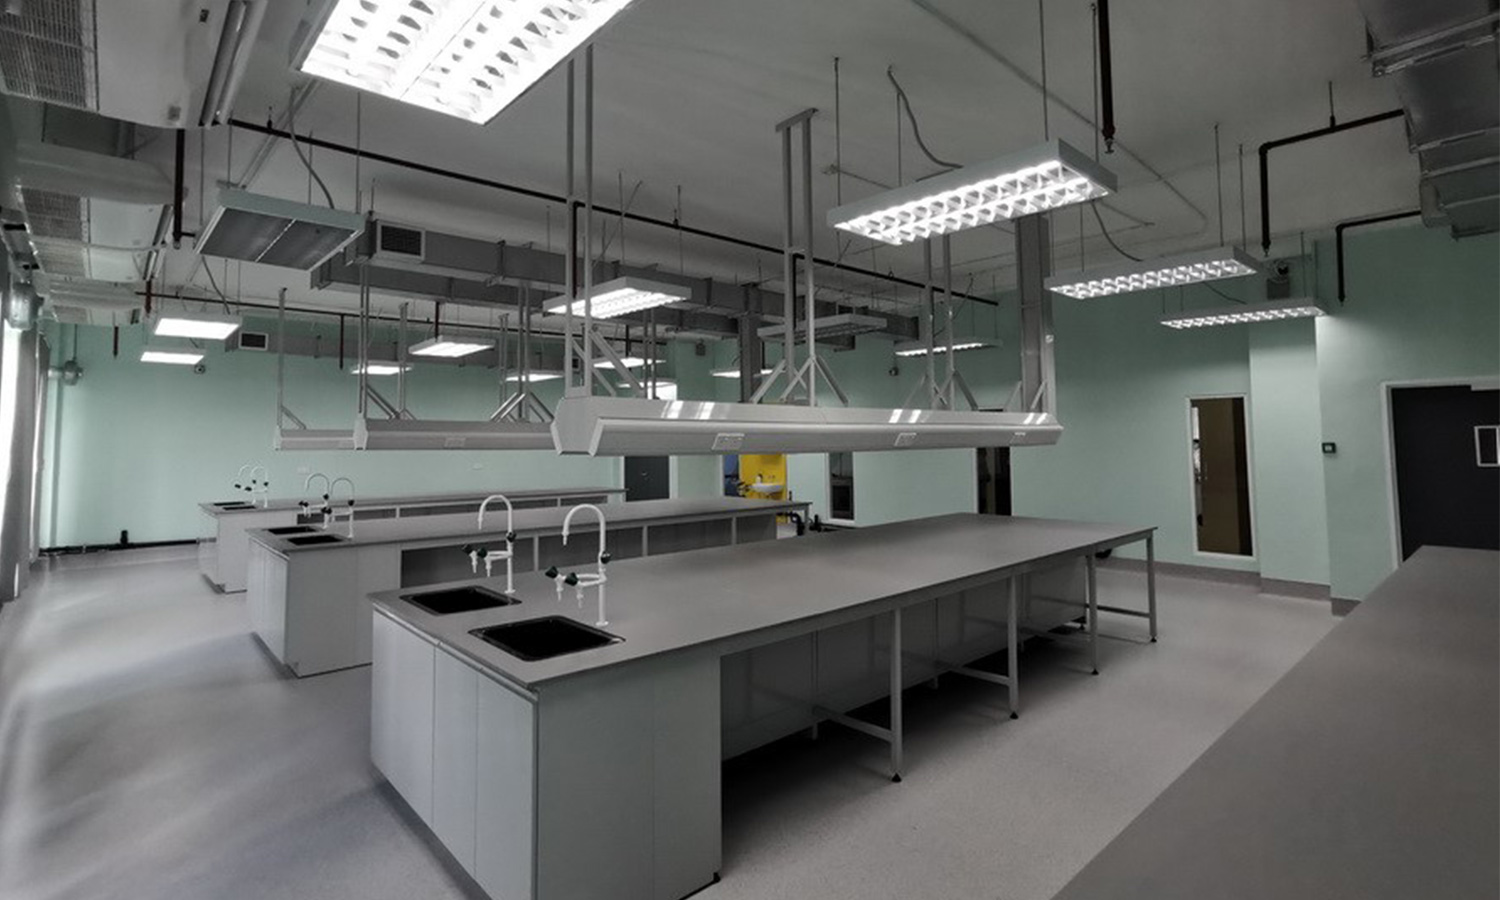 Final year research laboratory for Chemical Engineering students